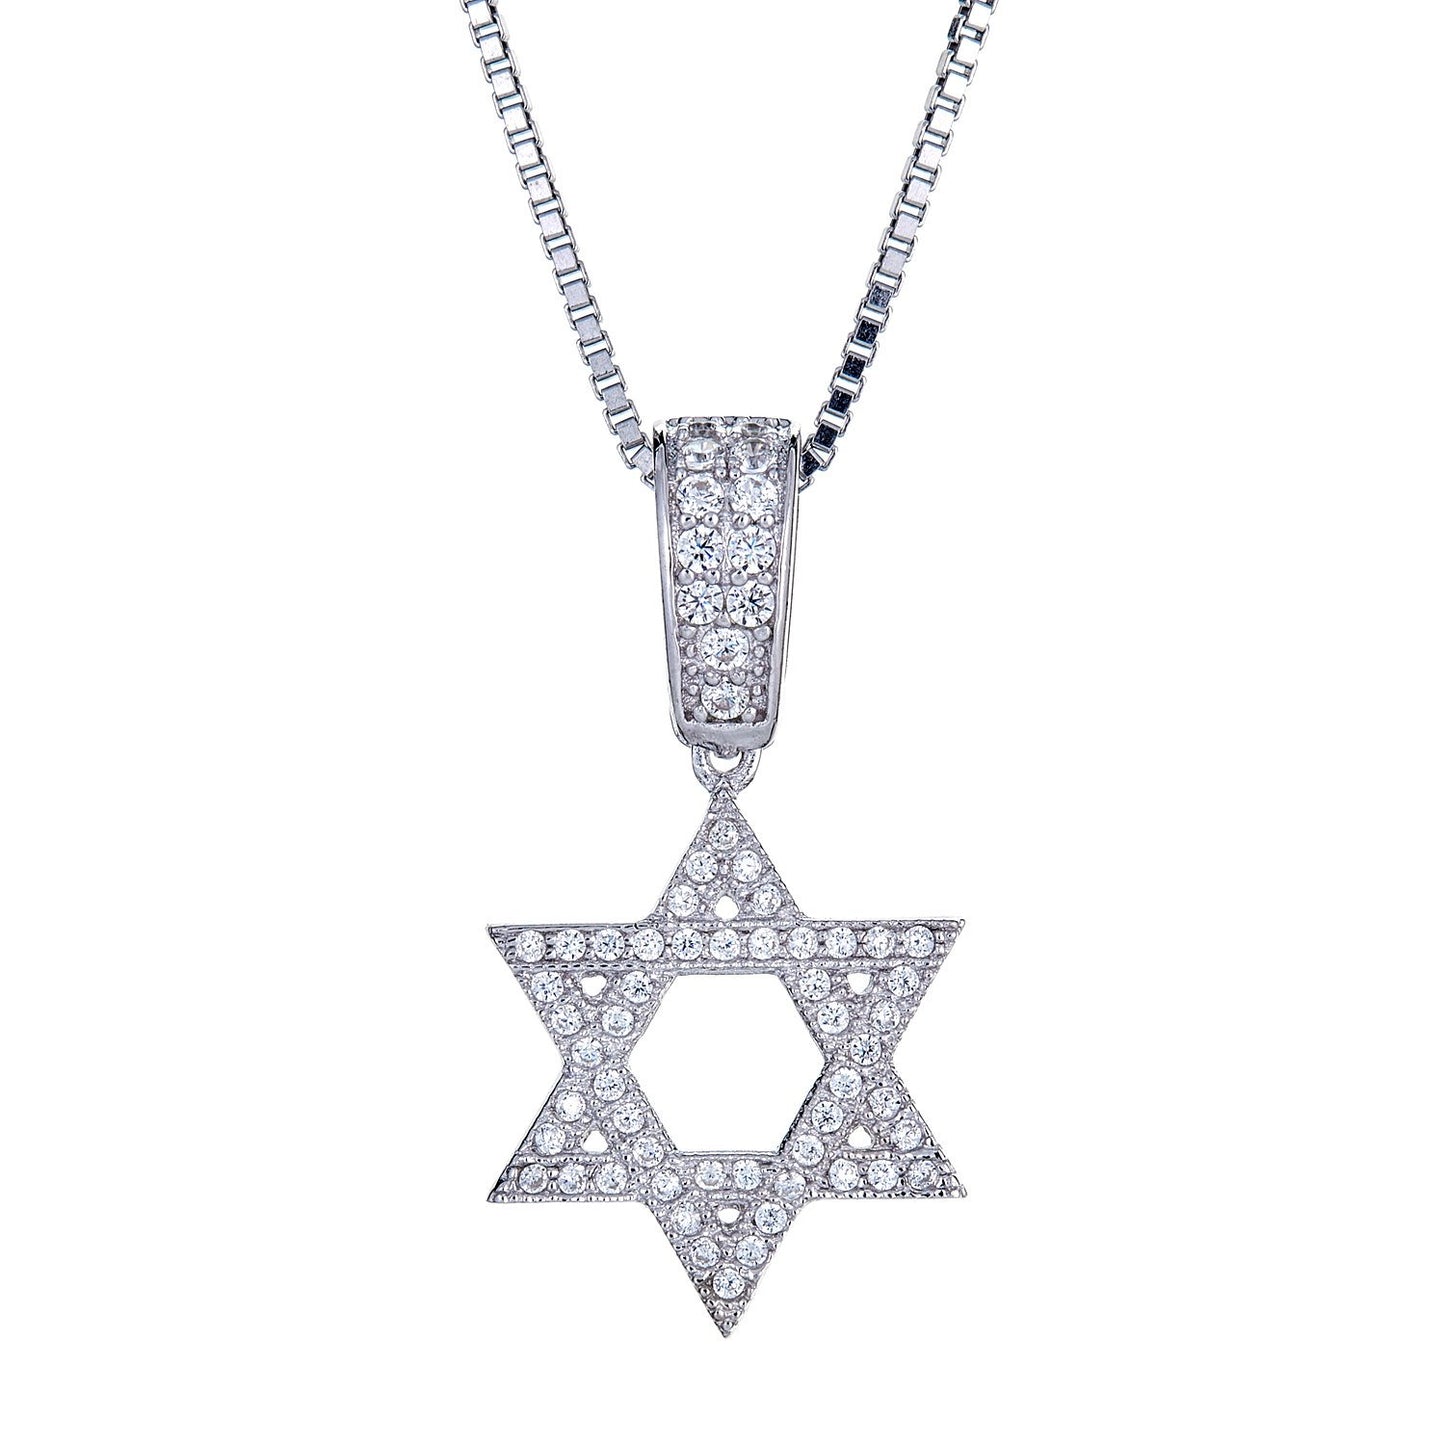 925 Sterling Silver Delicate Star of David Micro Pave Pendant with Chain (6 grams) - Betterjewelry